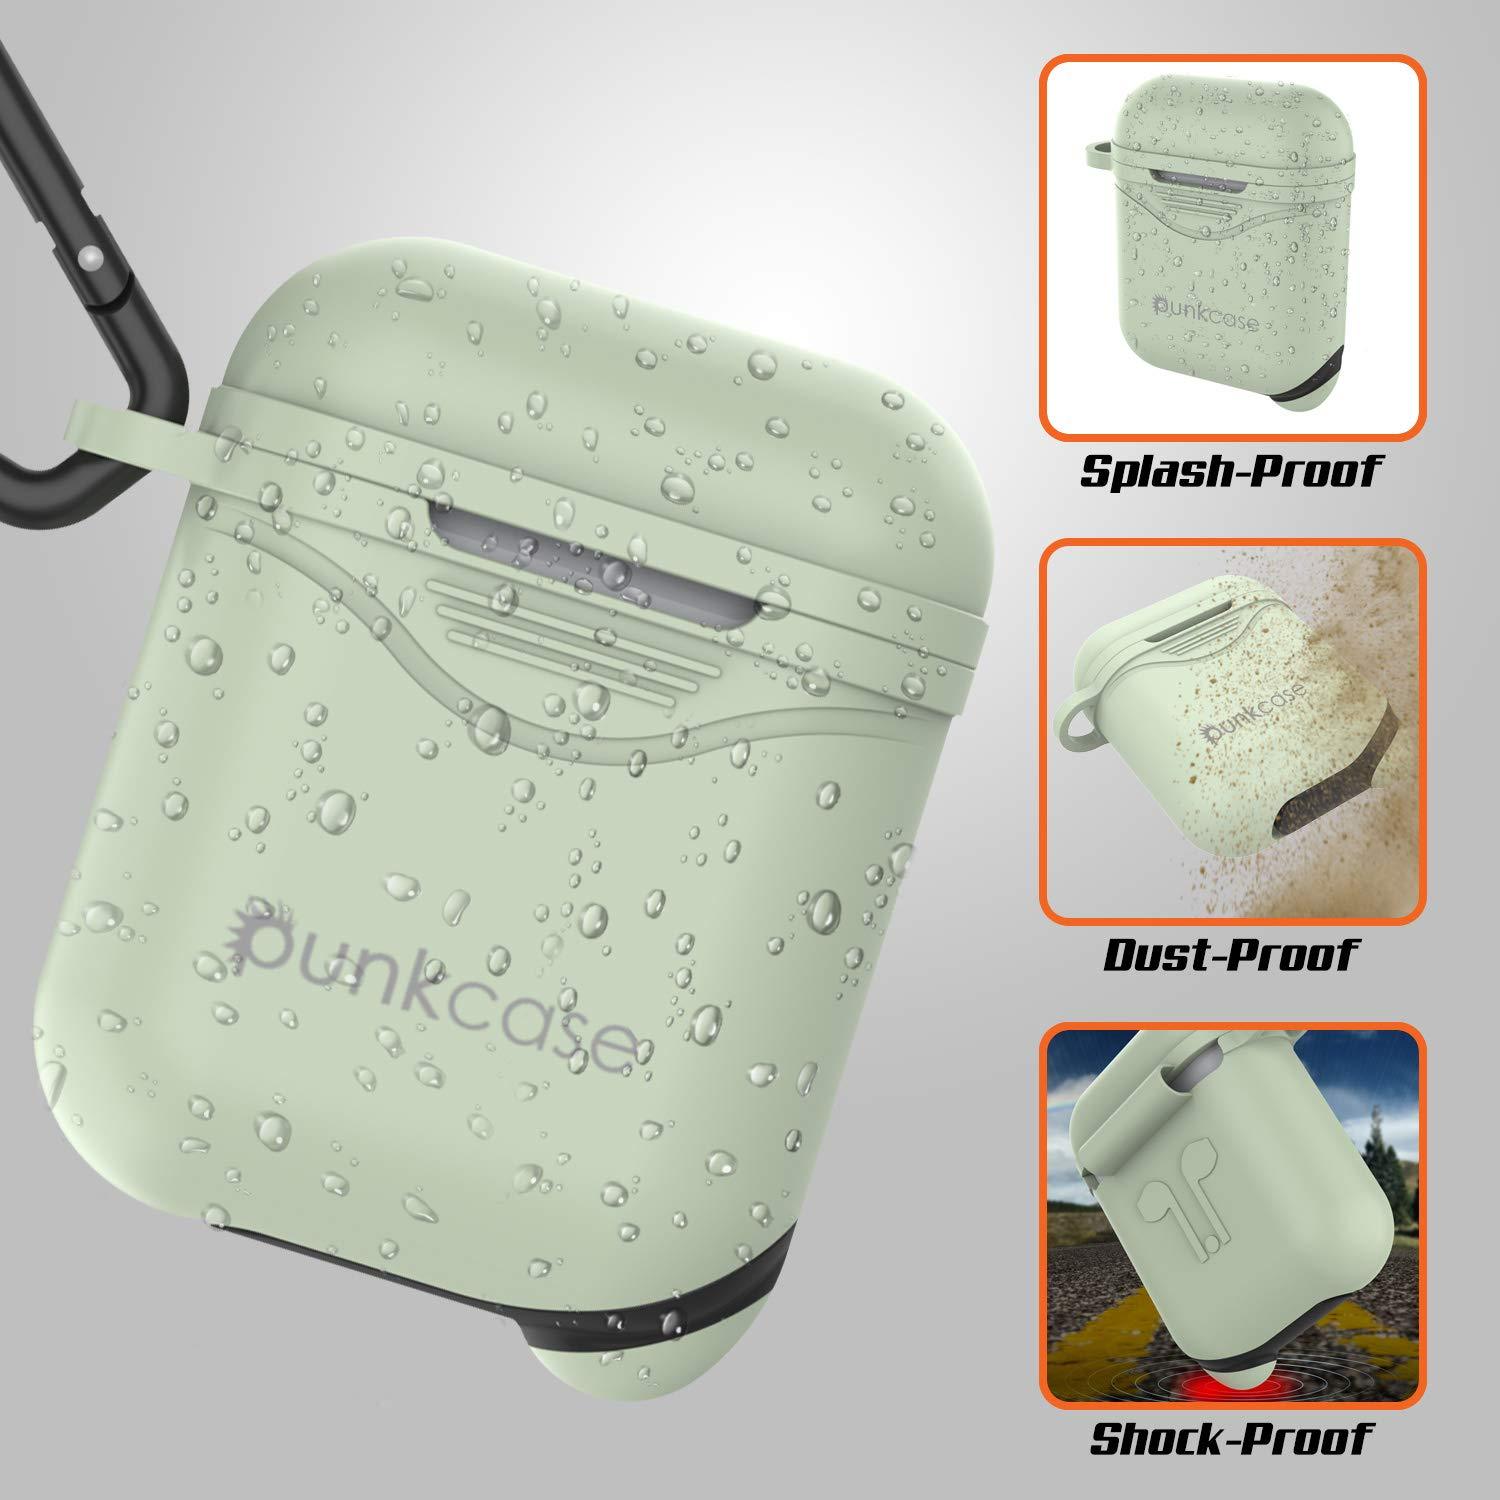 Punkcase Airpod Case with Keychain (Mint-Green)